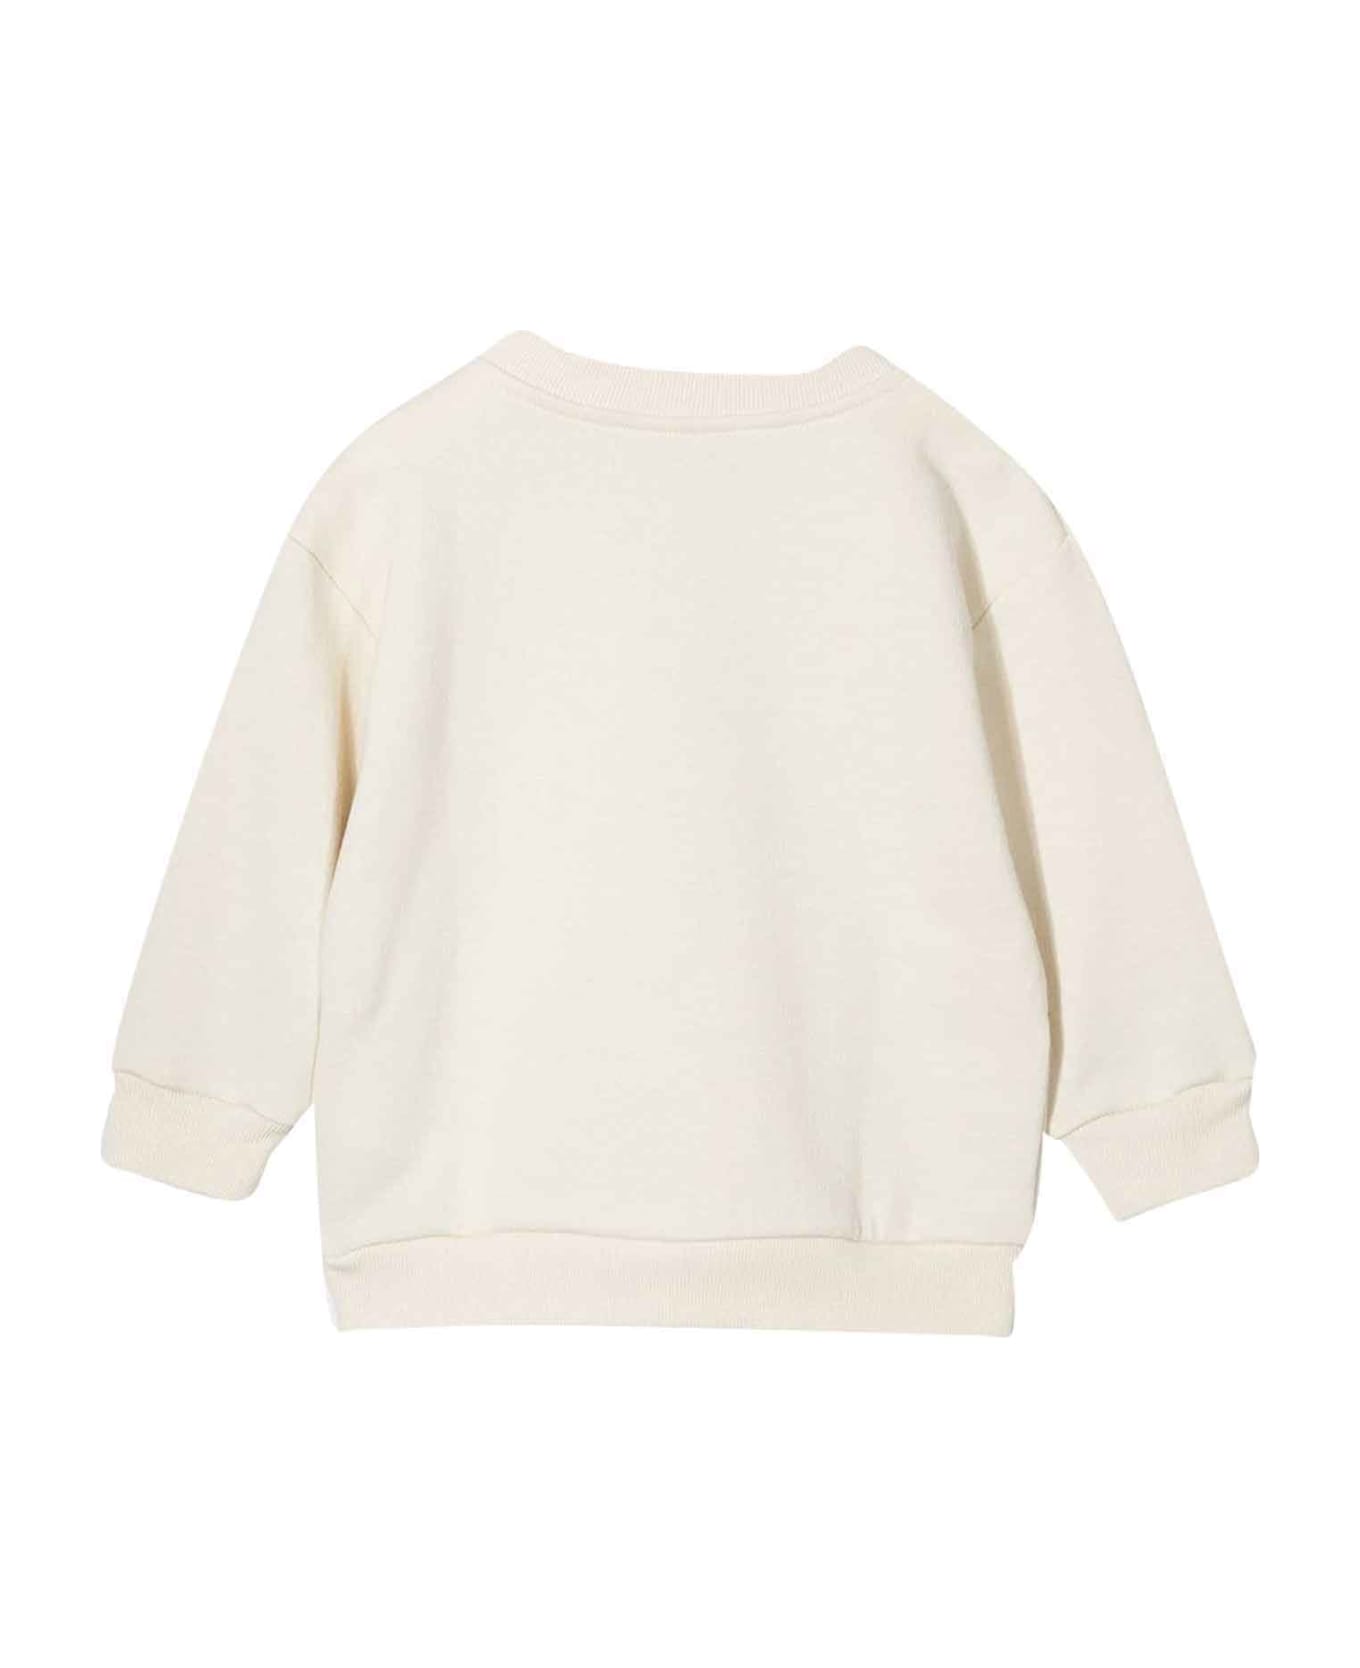 Gucci White Sweatshirt With Multicolor Frontal Press, Round Neck And Long Sleeve - Multicolor